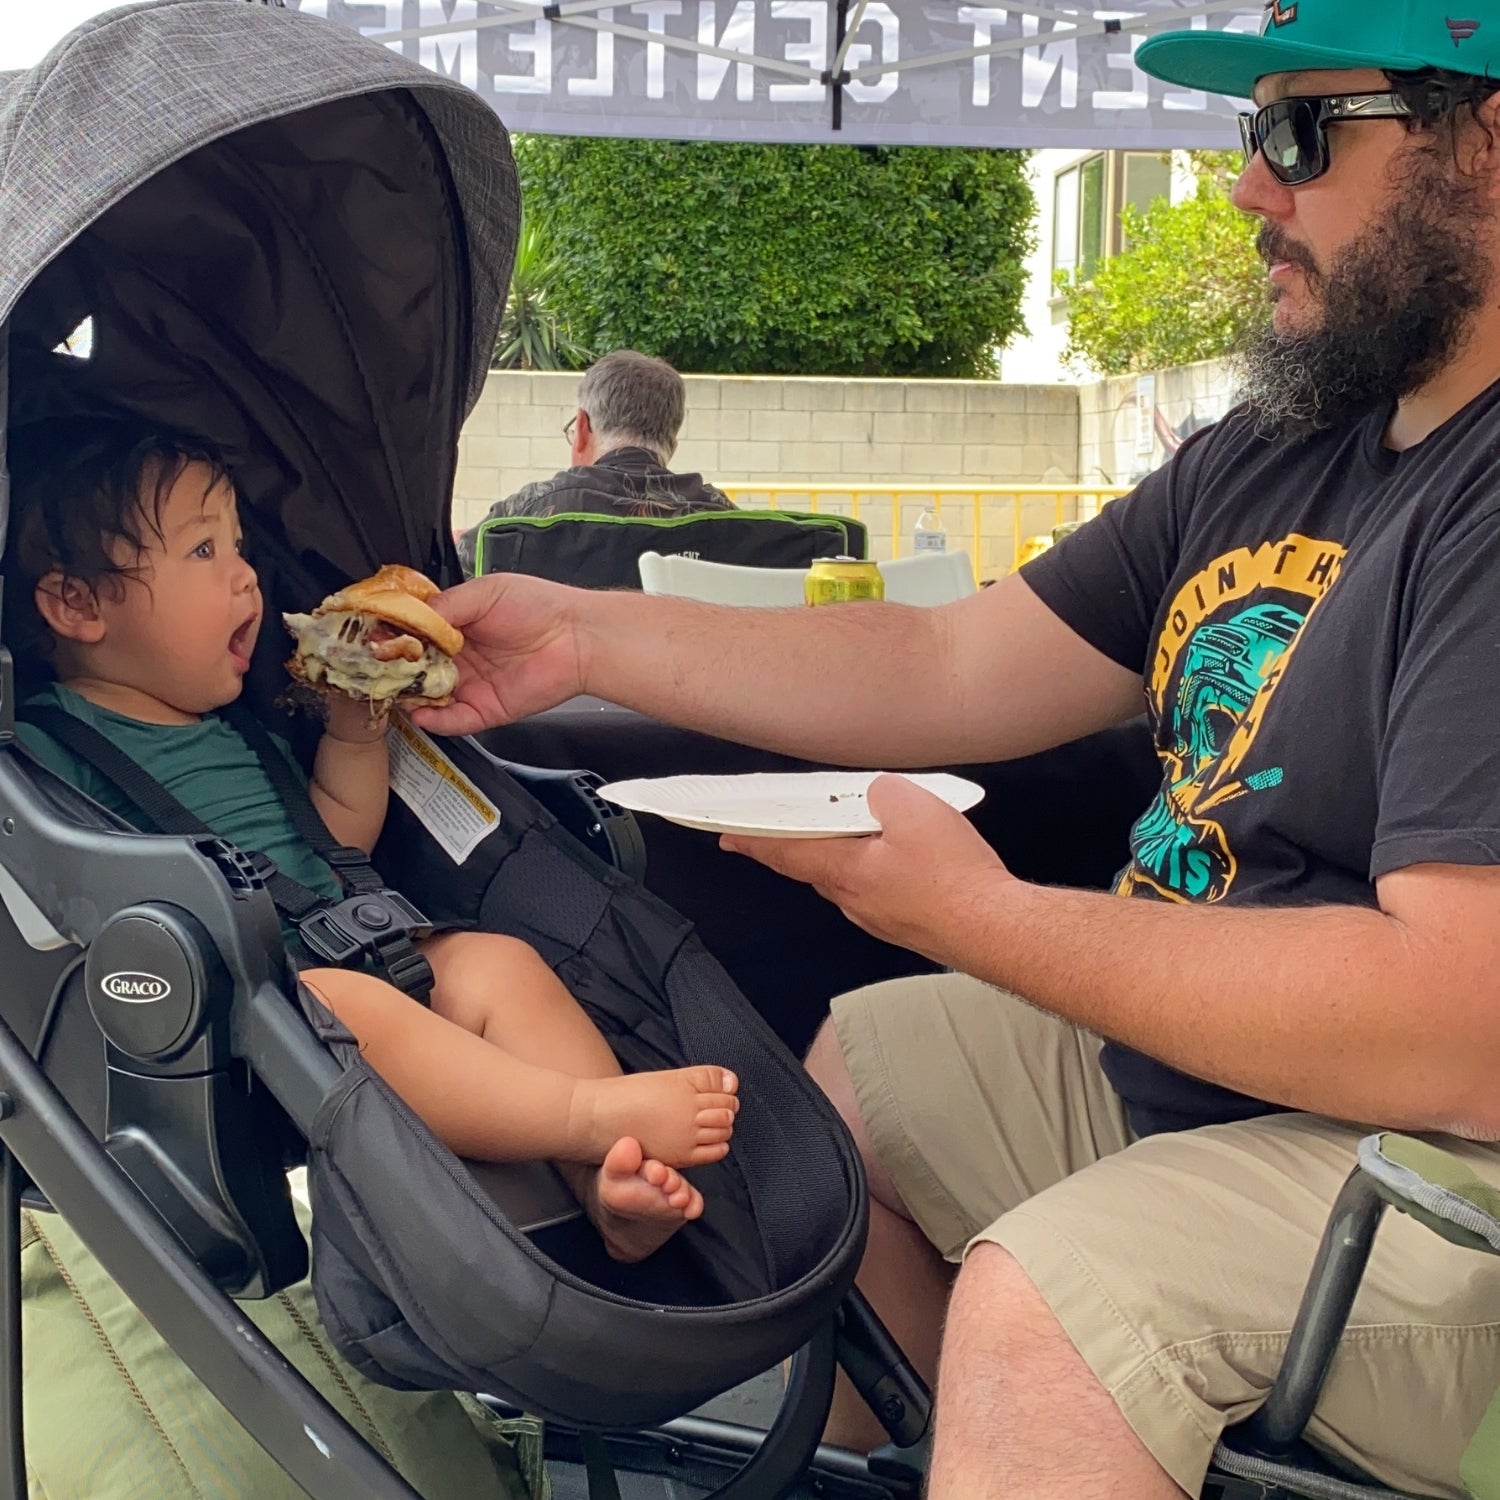 Delseyfly metoparis Hockey Clothing Company announces their Free Burger Friday kick offs on June 2nd in ROMA, California. Text your buds and start planning some trips down to VG HQ! In the meantime, take a look at these snapshots from previous FBFs. 